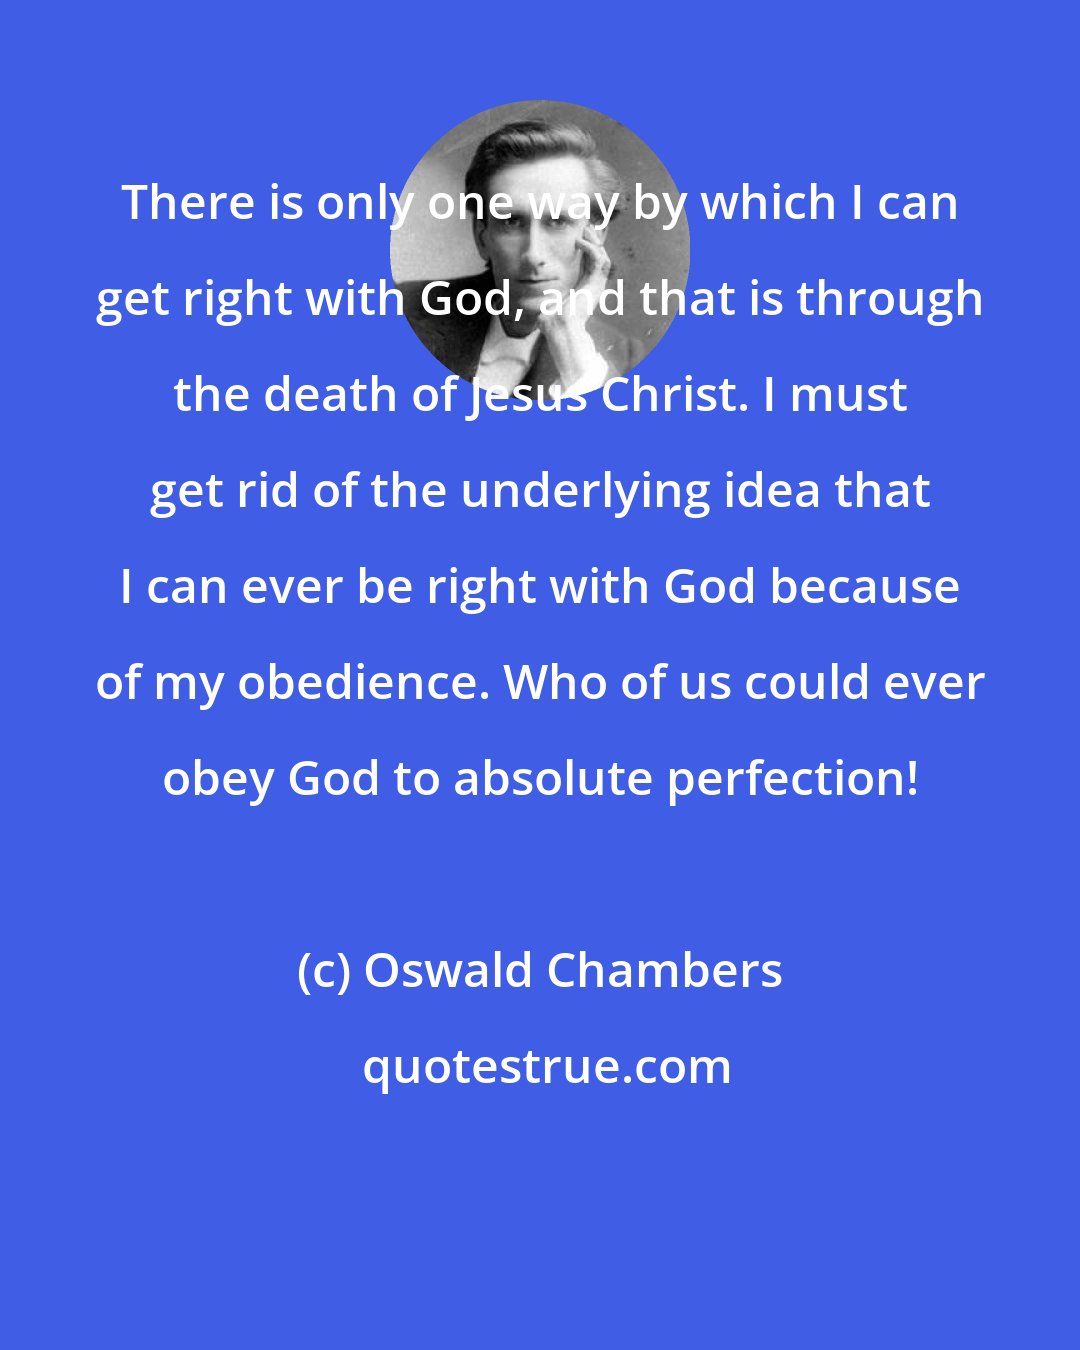 Oswald Chambers: There is only one way by which I can get right with God, and that is through the death of Jesus Christ. I must get rid of the underlying idea that I can ever be right with God because of my obedience. Who of us could ever obey God to absolute perfection!